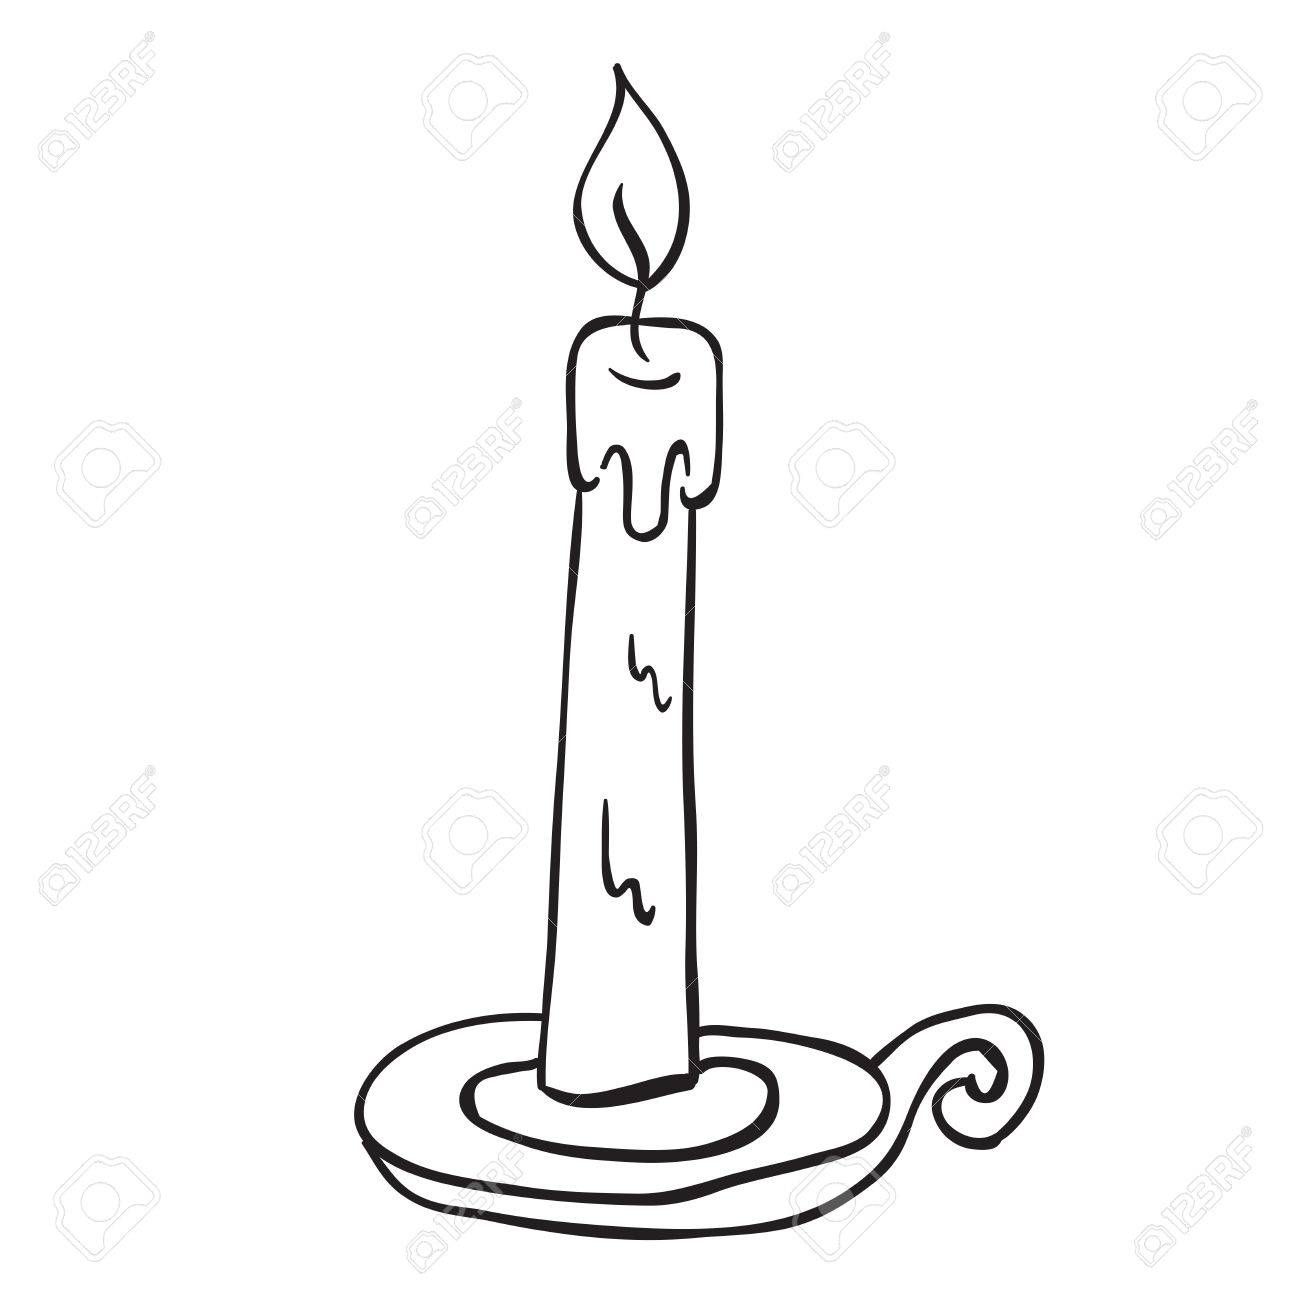 Melted candle drawing at. Candles clipart simple